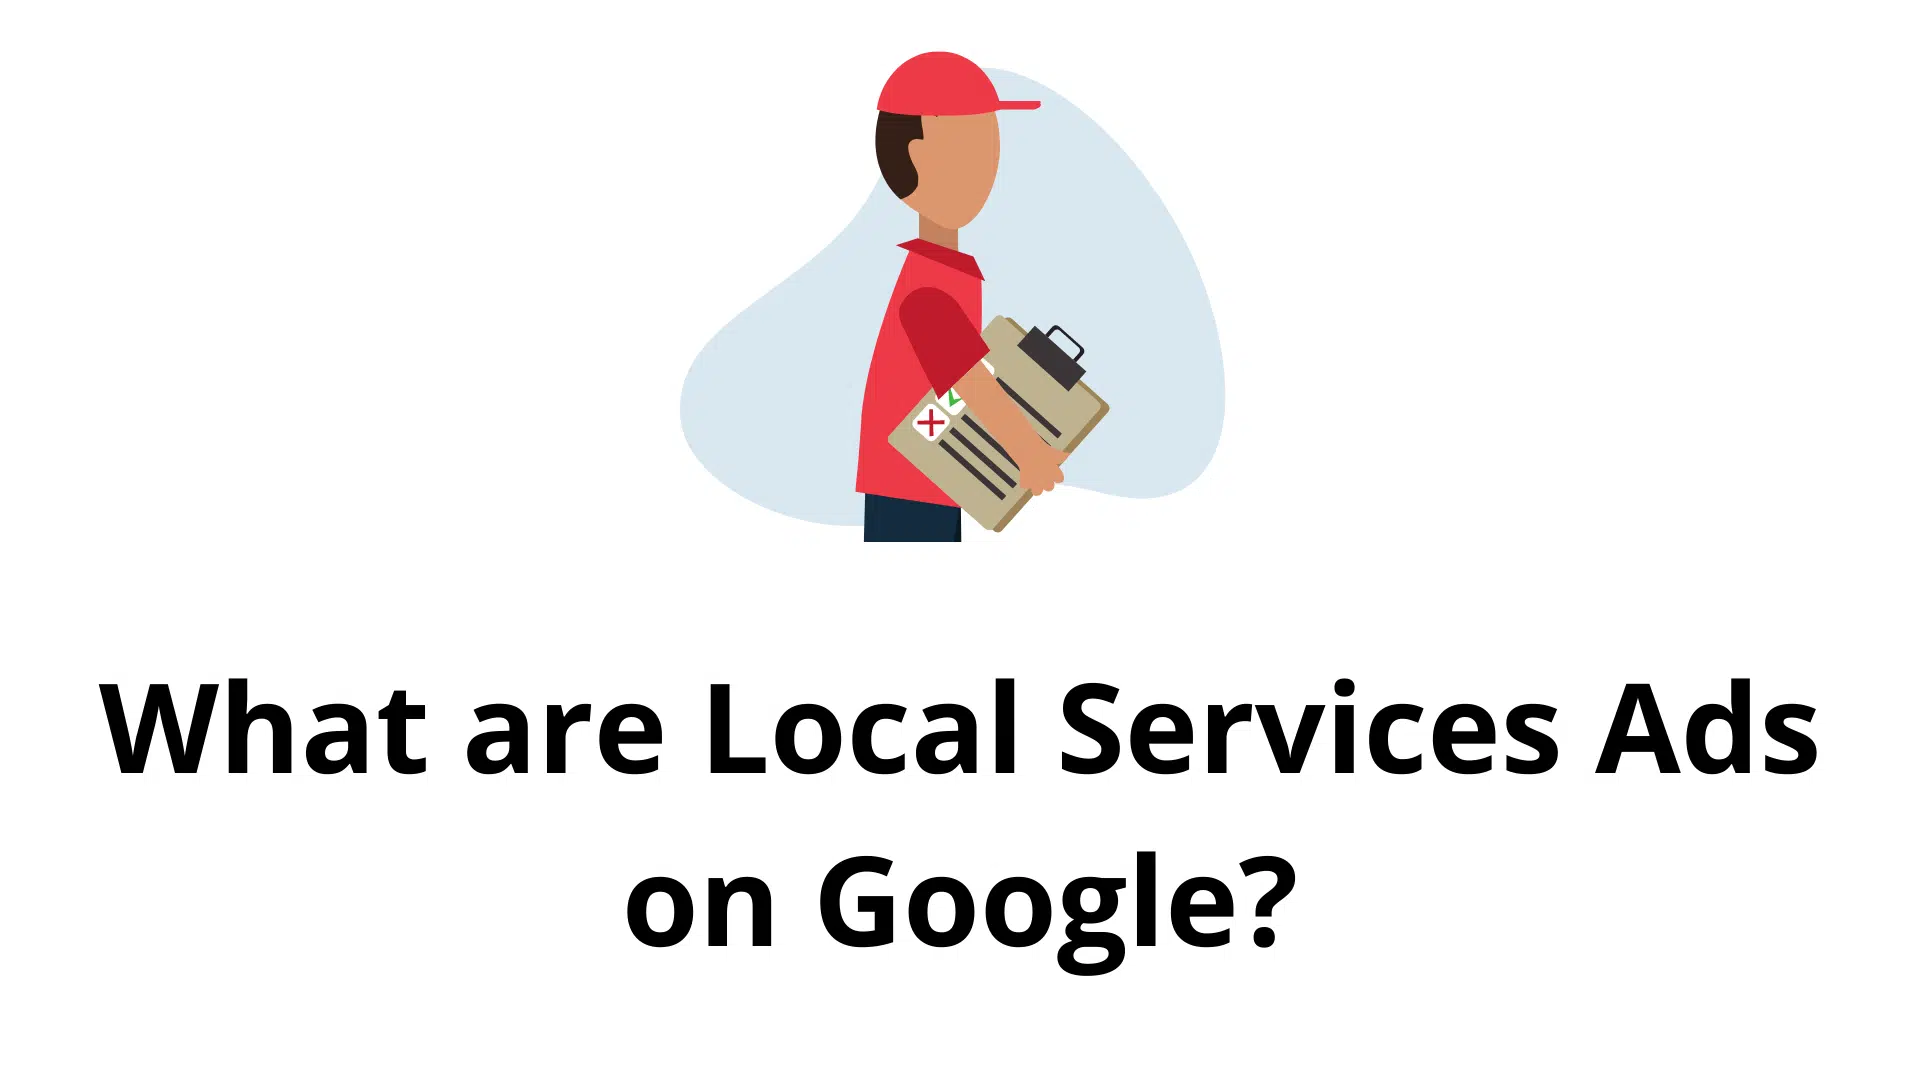 Local Services Ads on Google